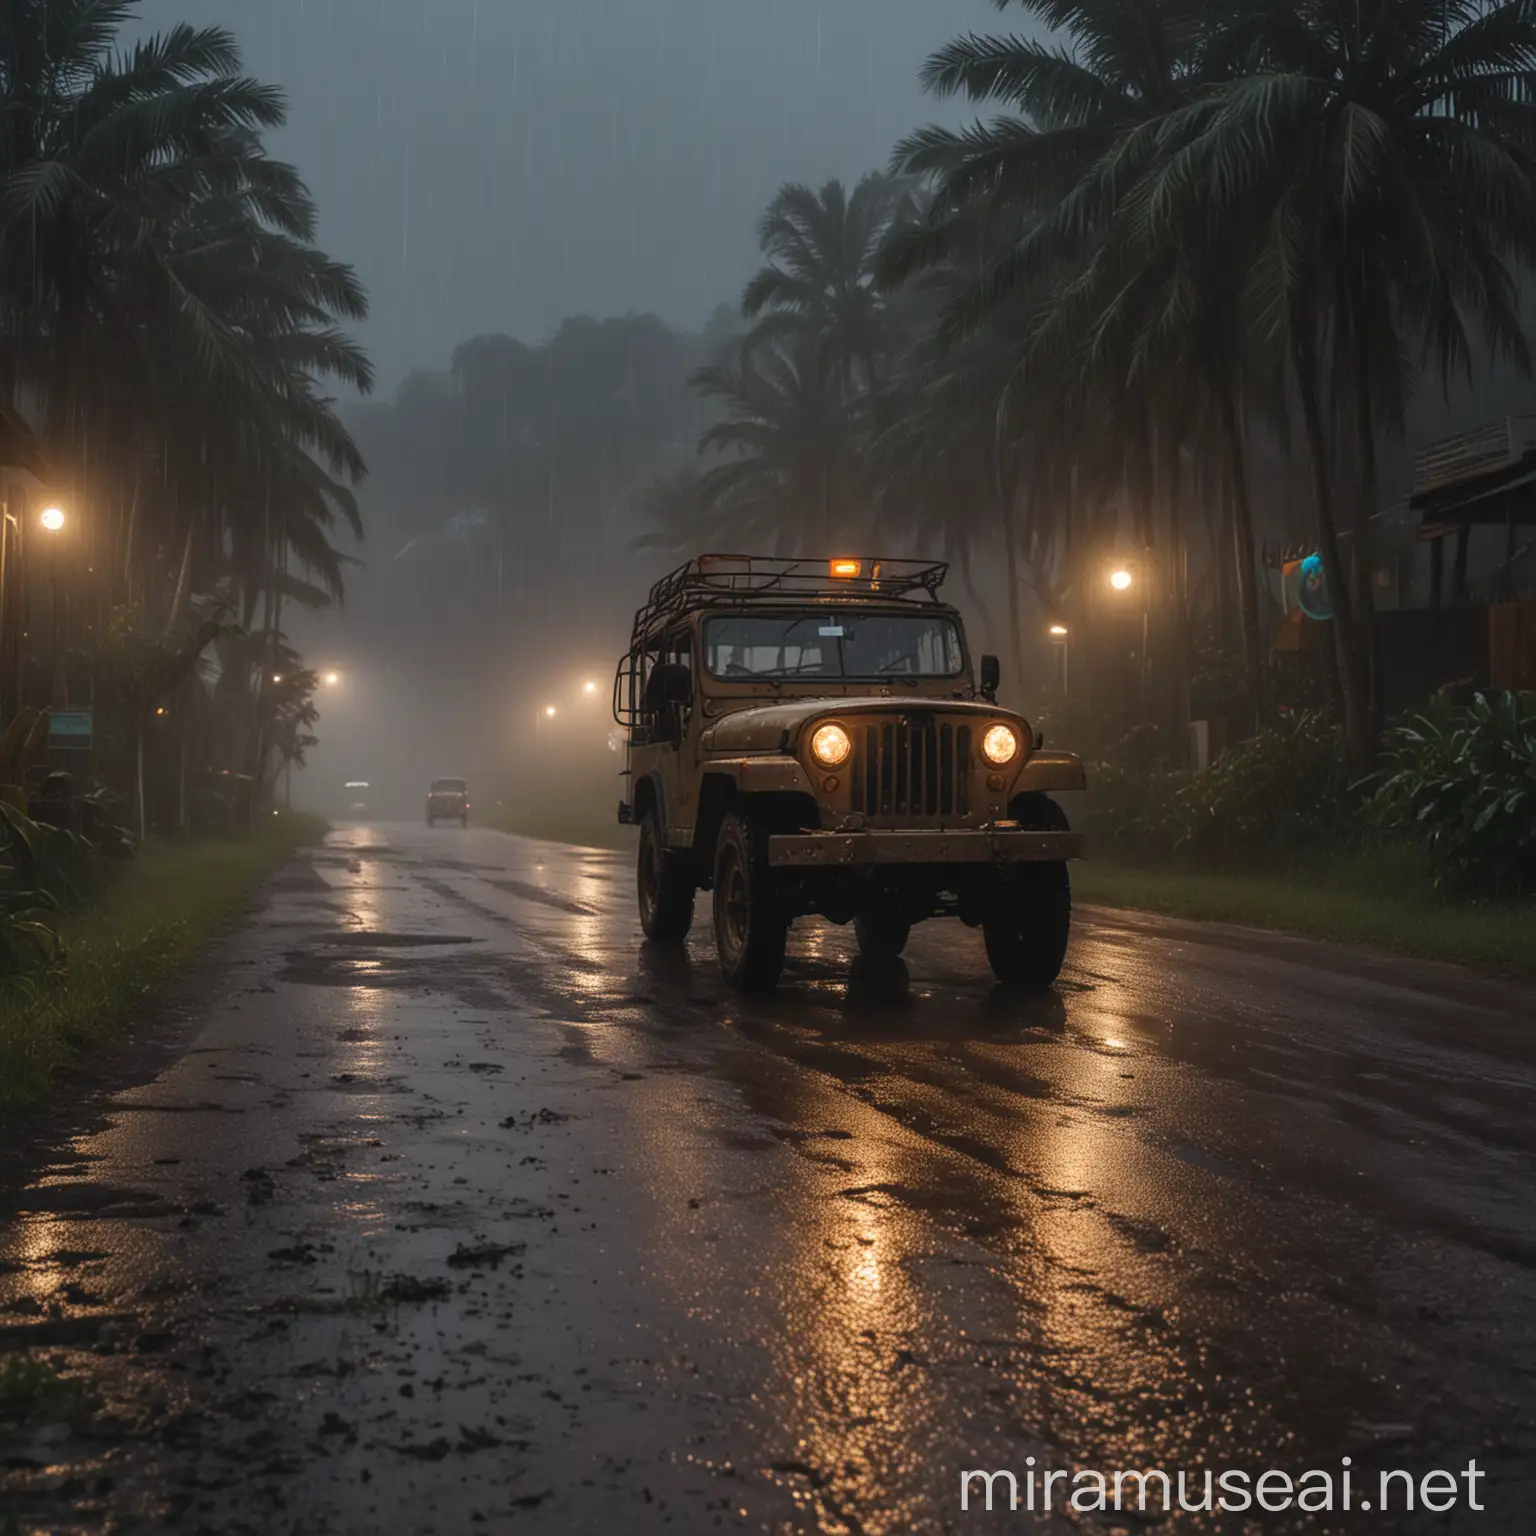 Rainy Night Journey Old Jeep Approaching Vintage Resort with Lone Girl